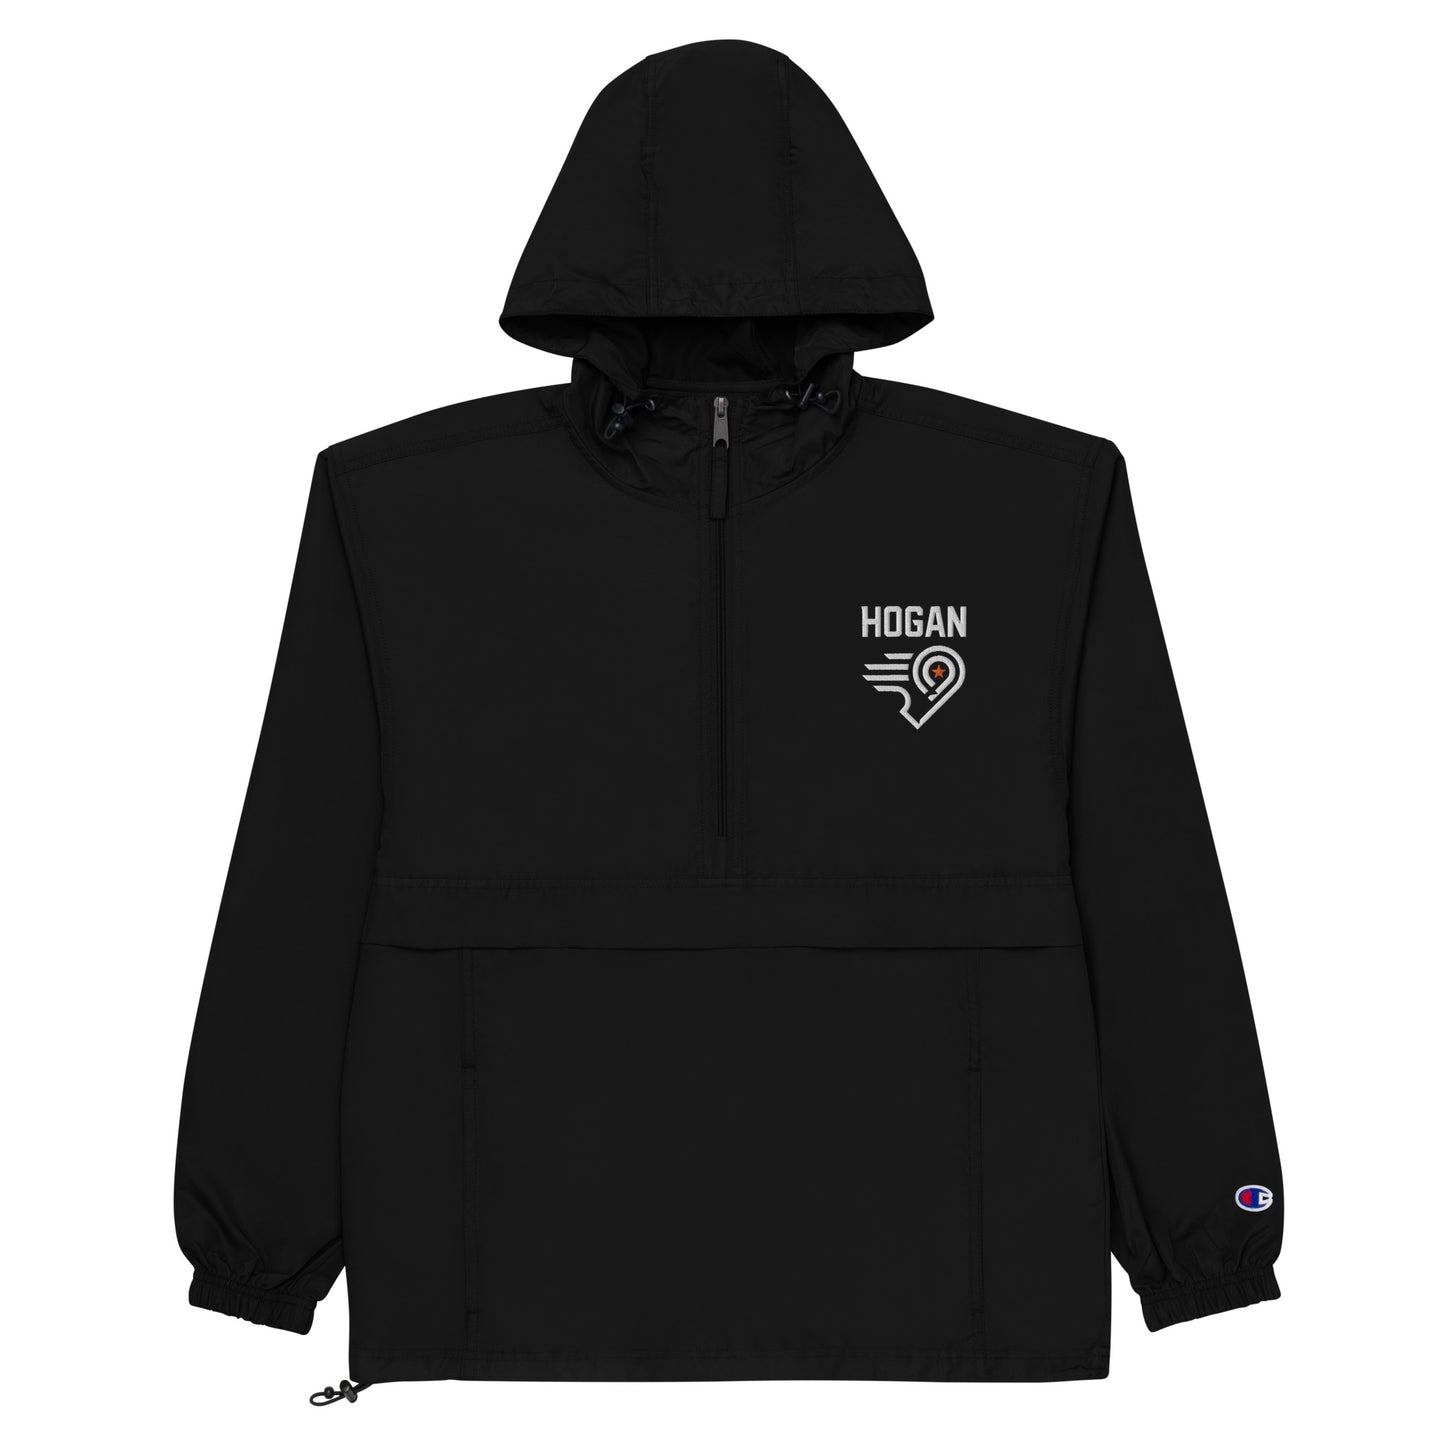 Hogan Embroidered Champion Packable Jacket